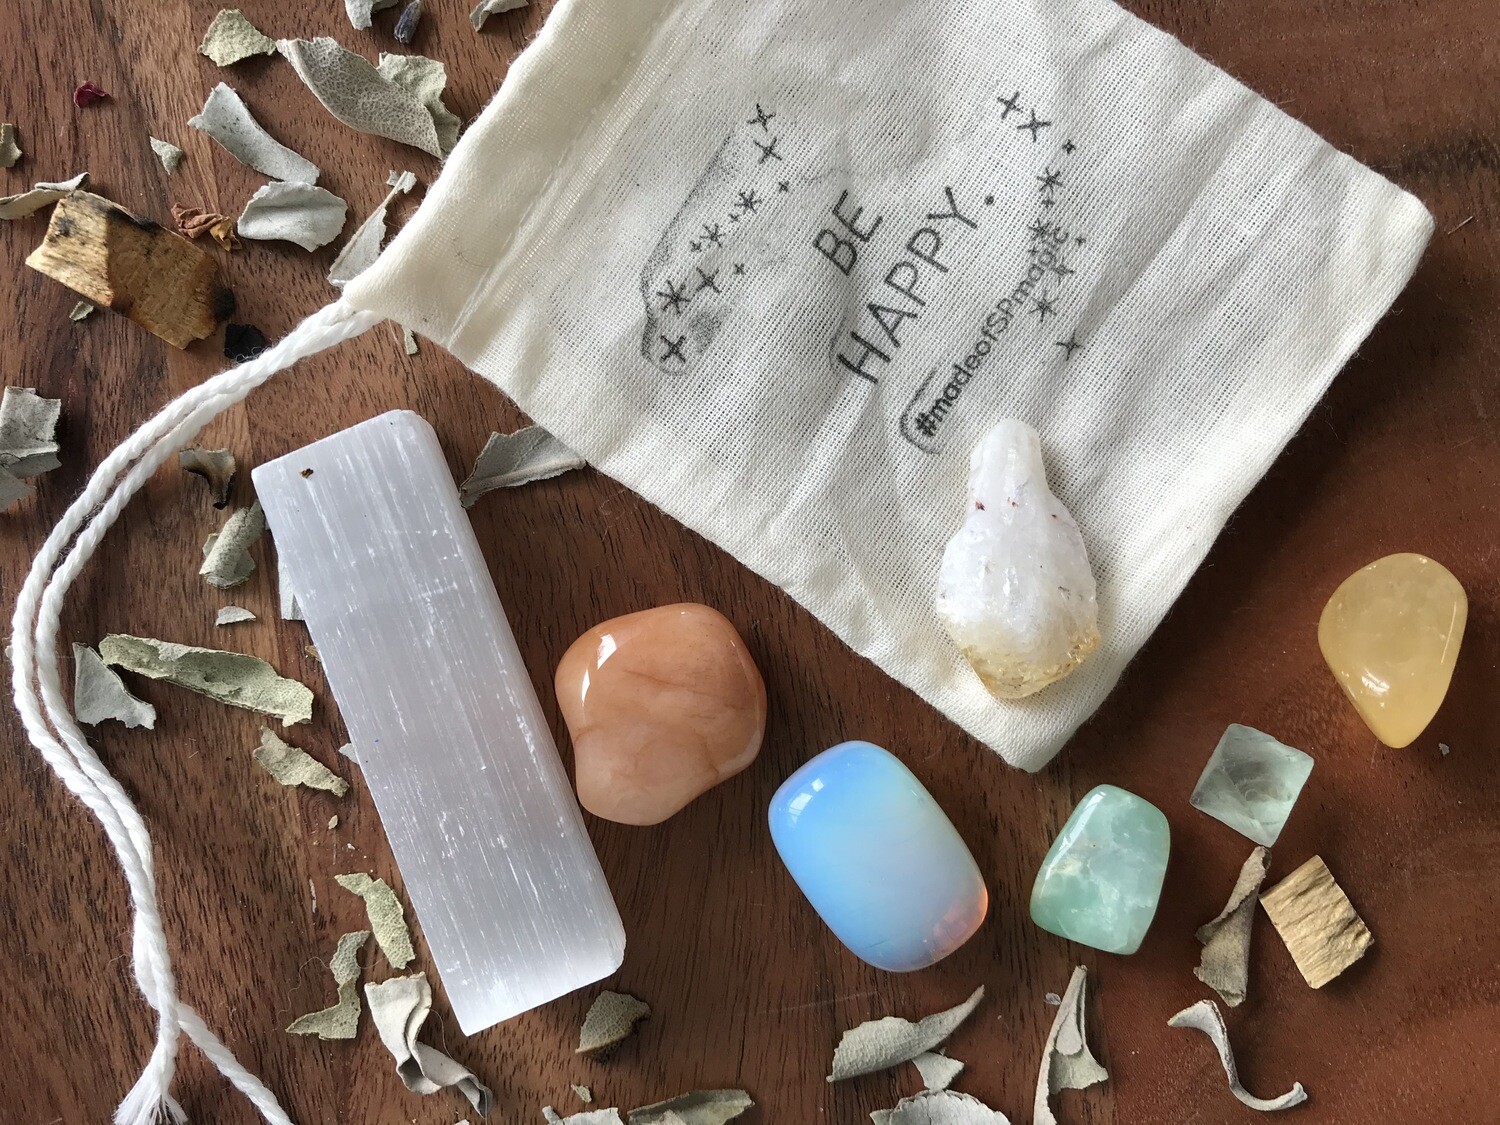 The "Be Happy" Crystal Healing Set